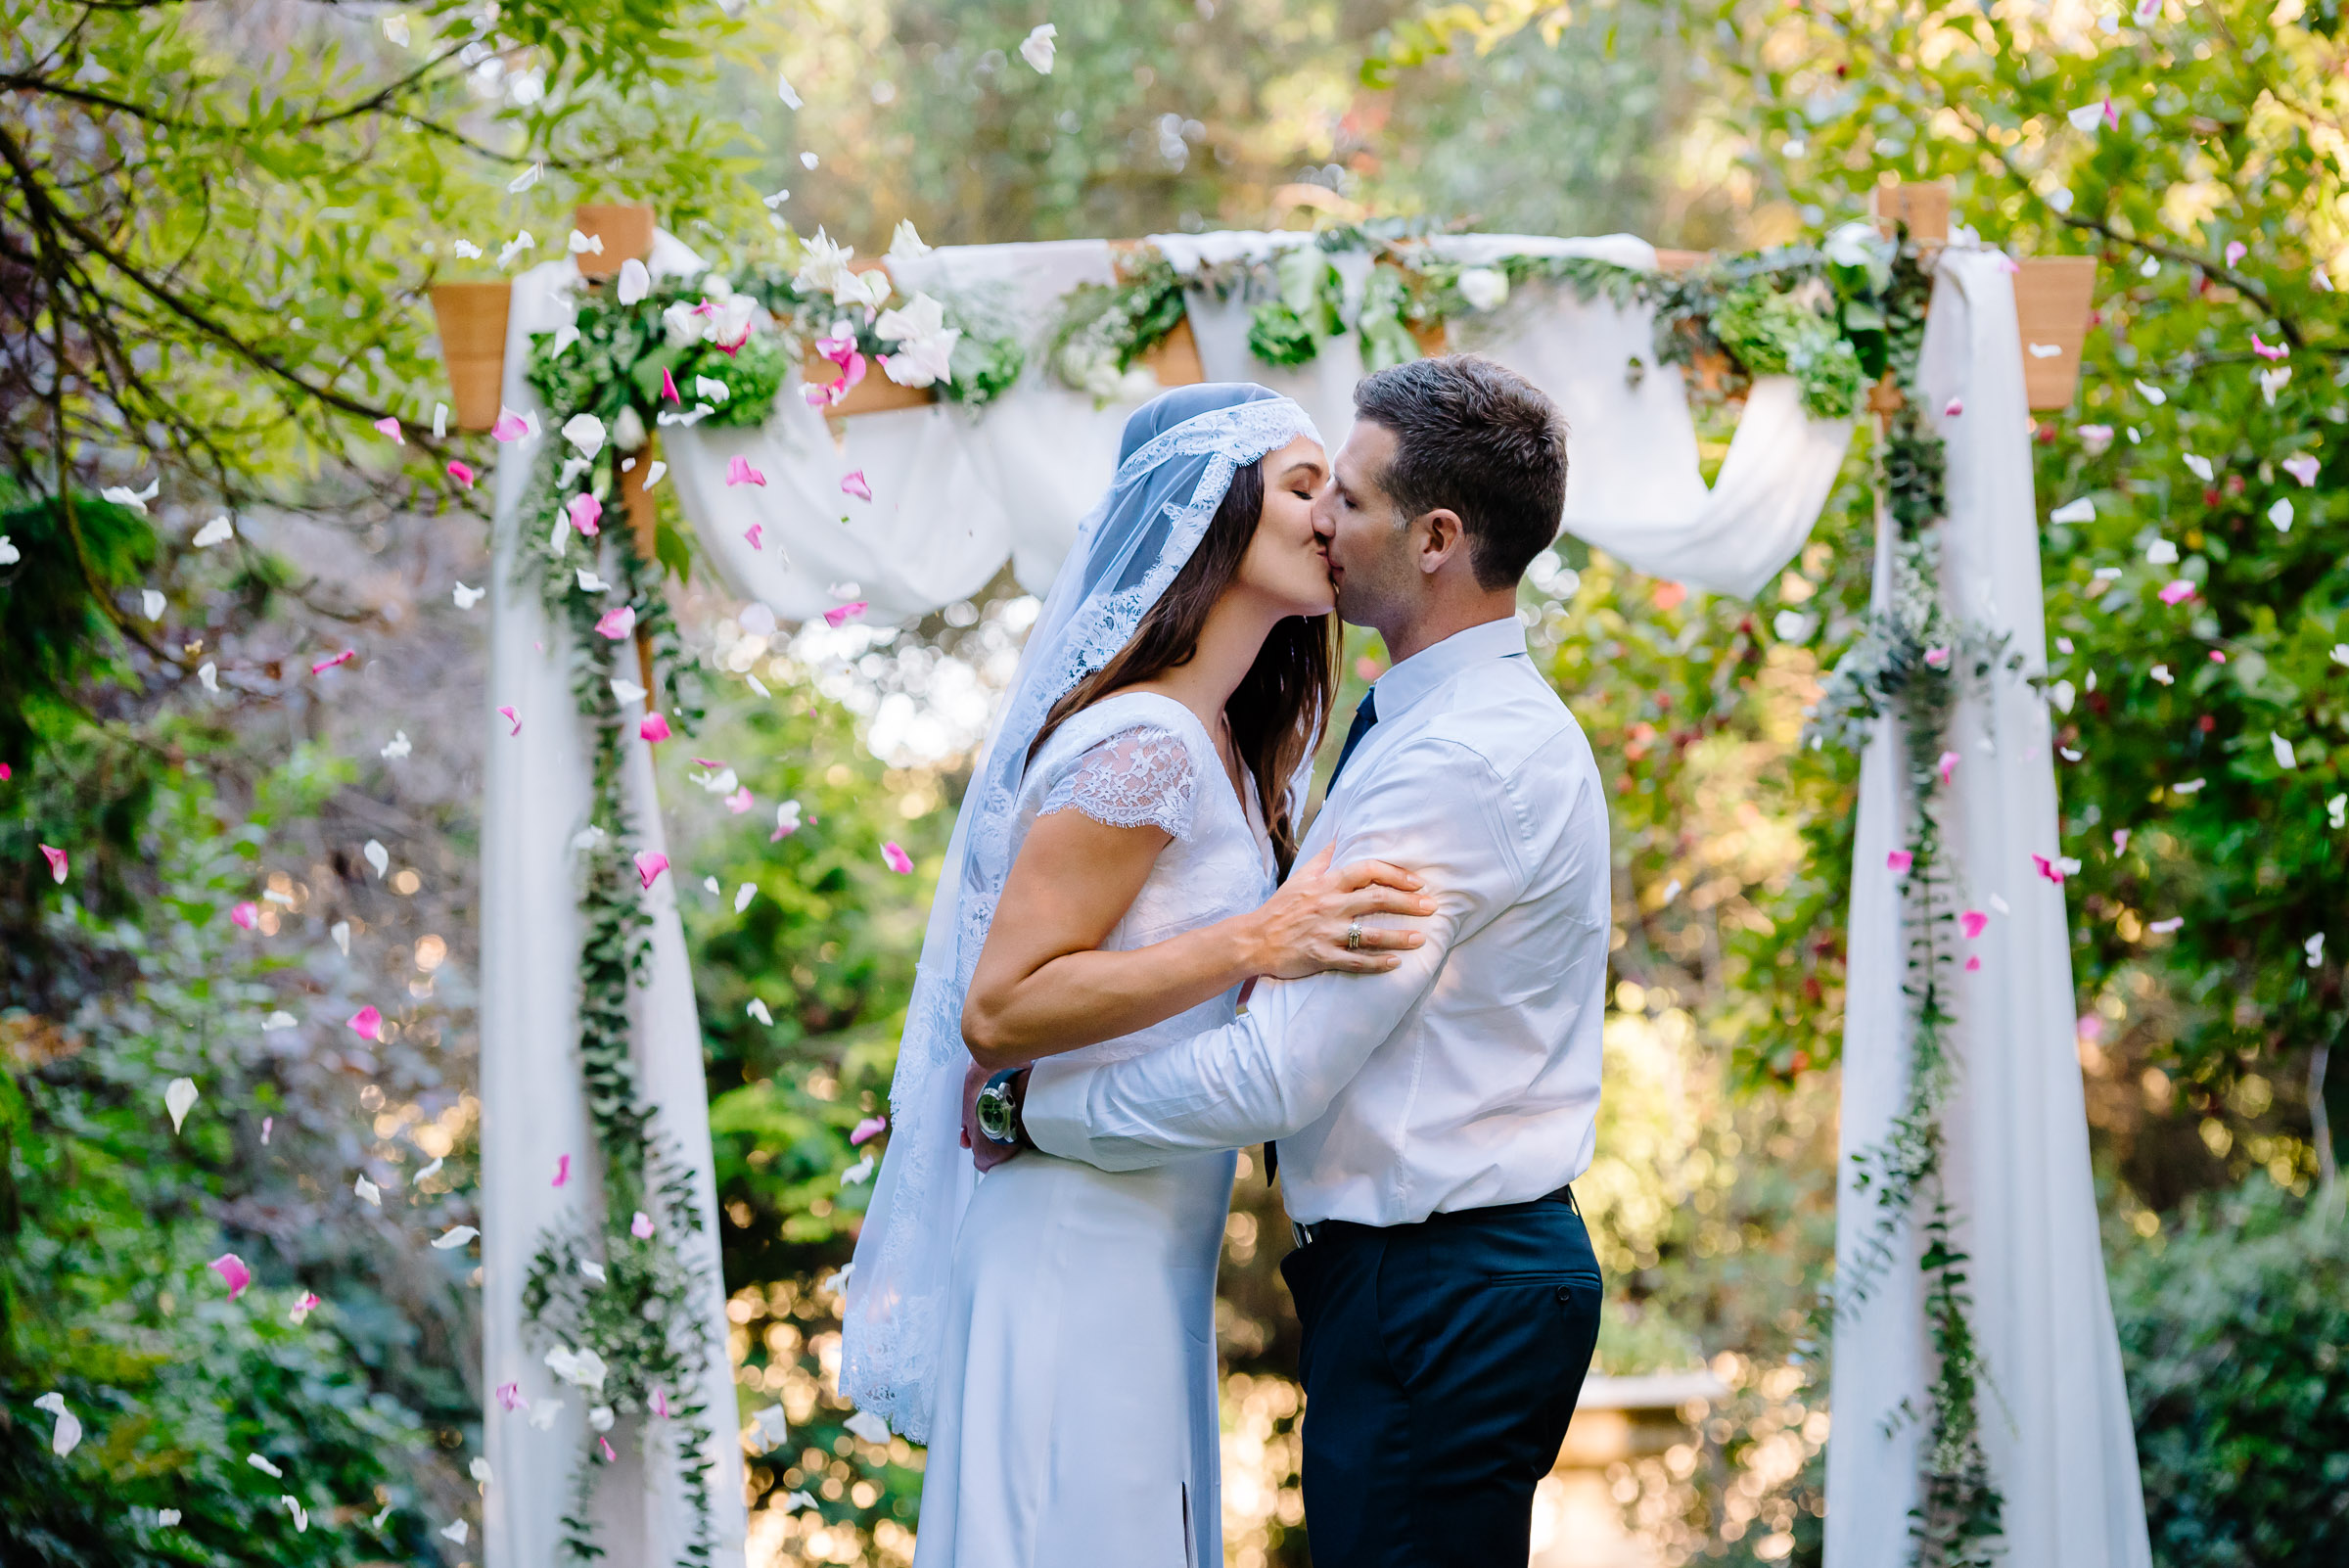 Carly and Daniel kissing in front of their amazing arbour